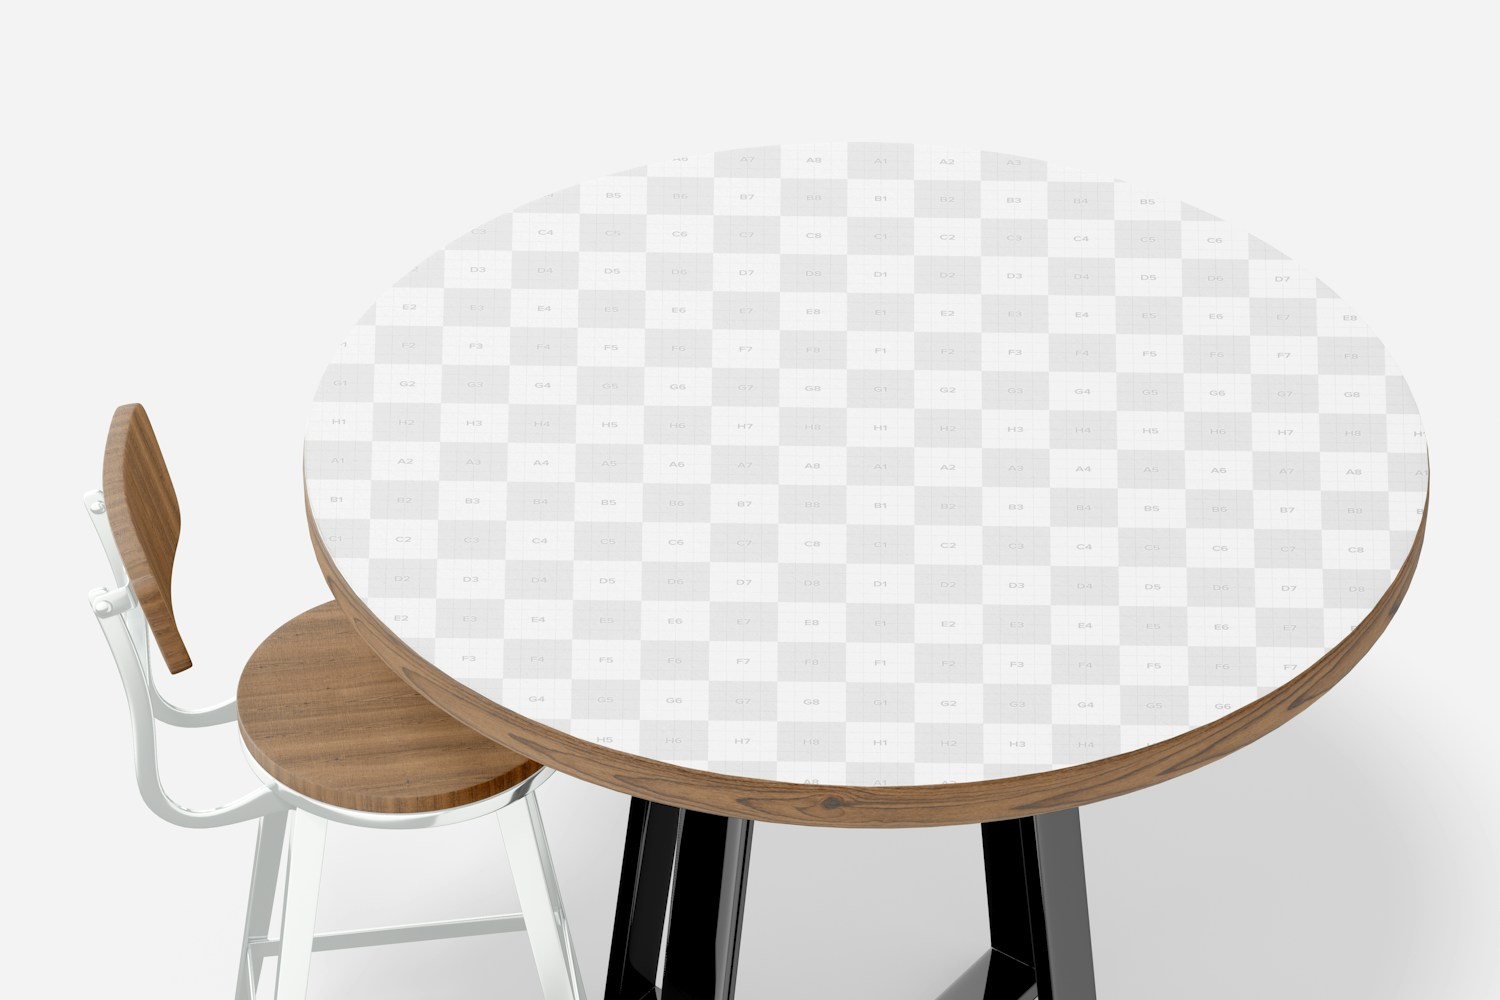 Wooden Round Table Mockup